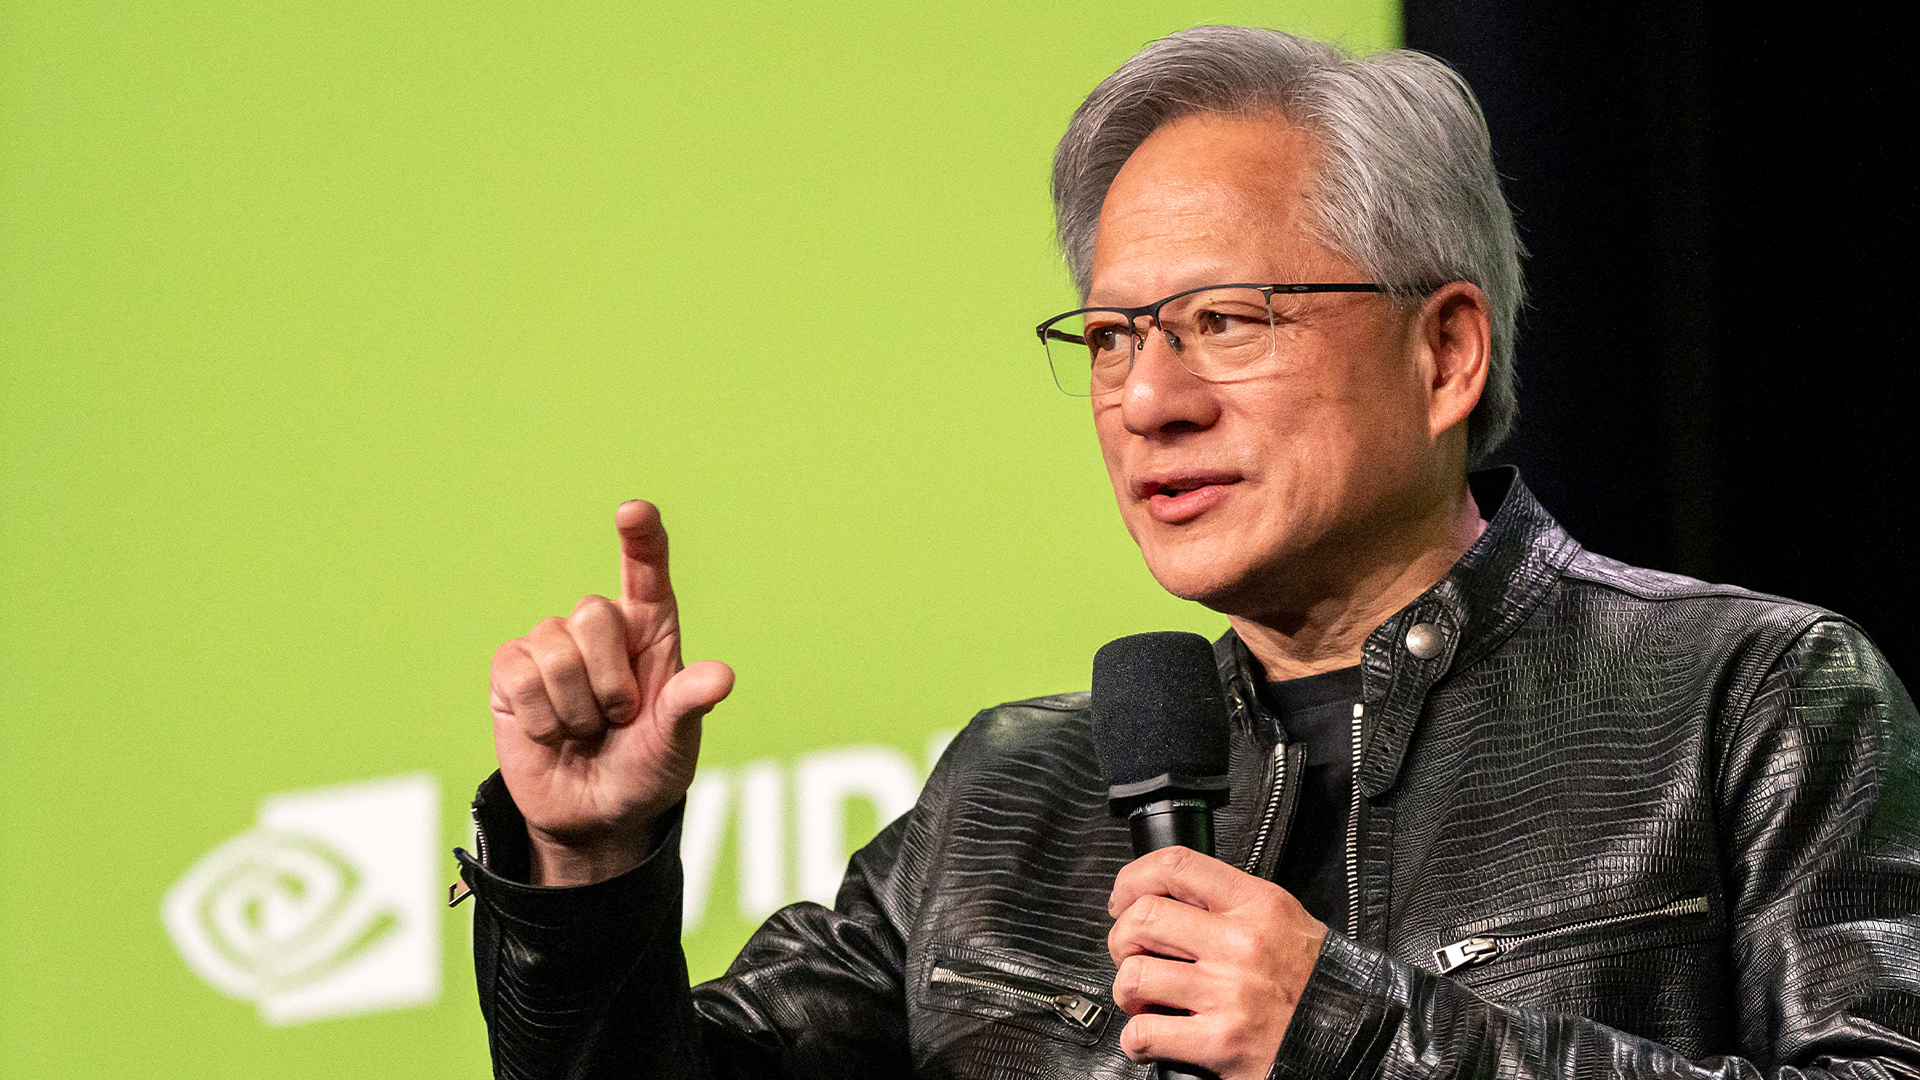 Nvidia wants telecommunications companies to step up 6G research and bets that AI will be the key to future development